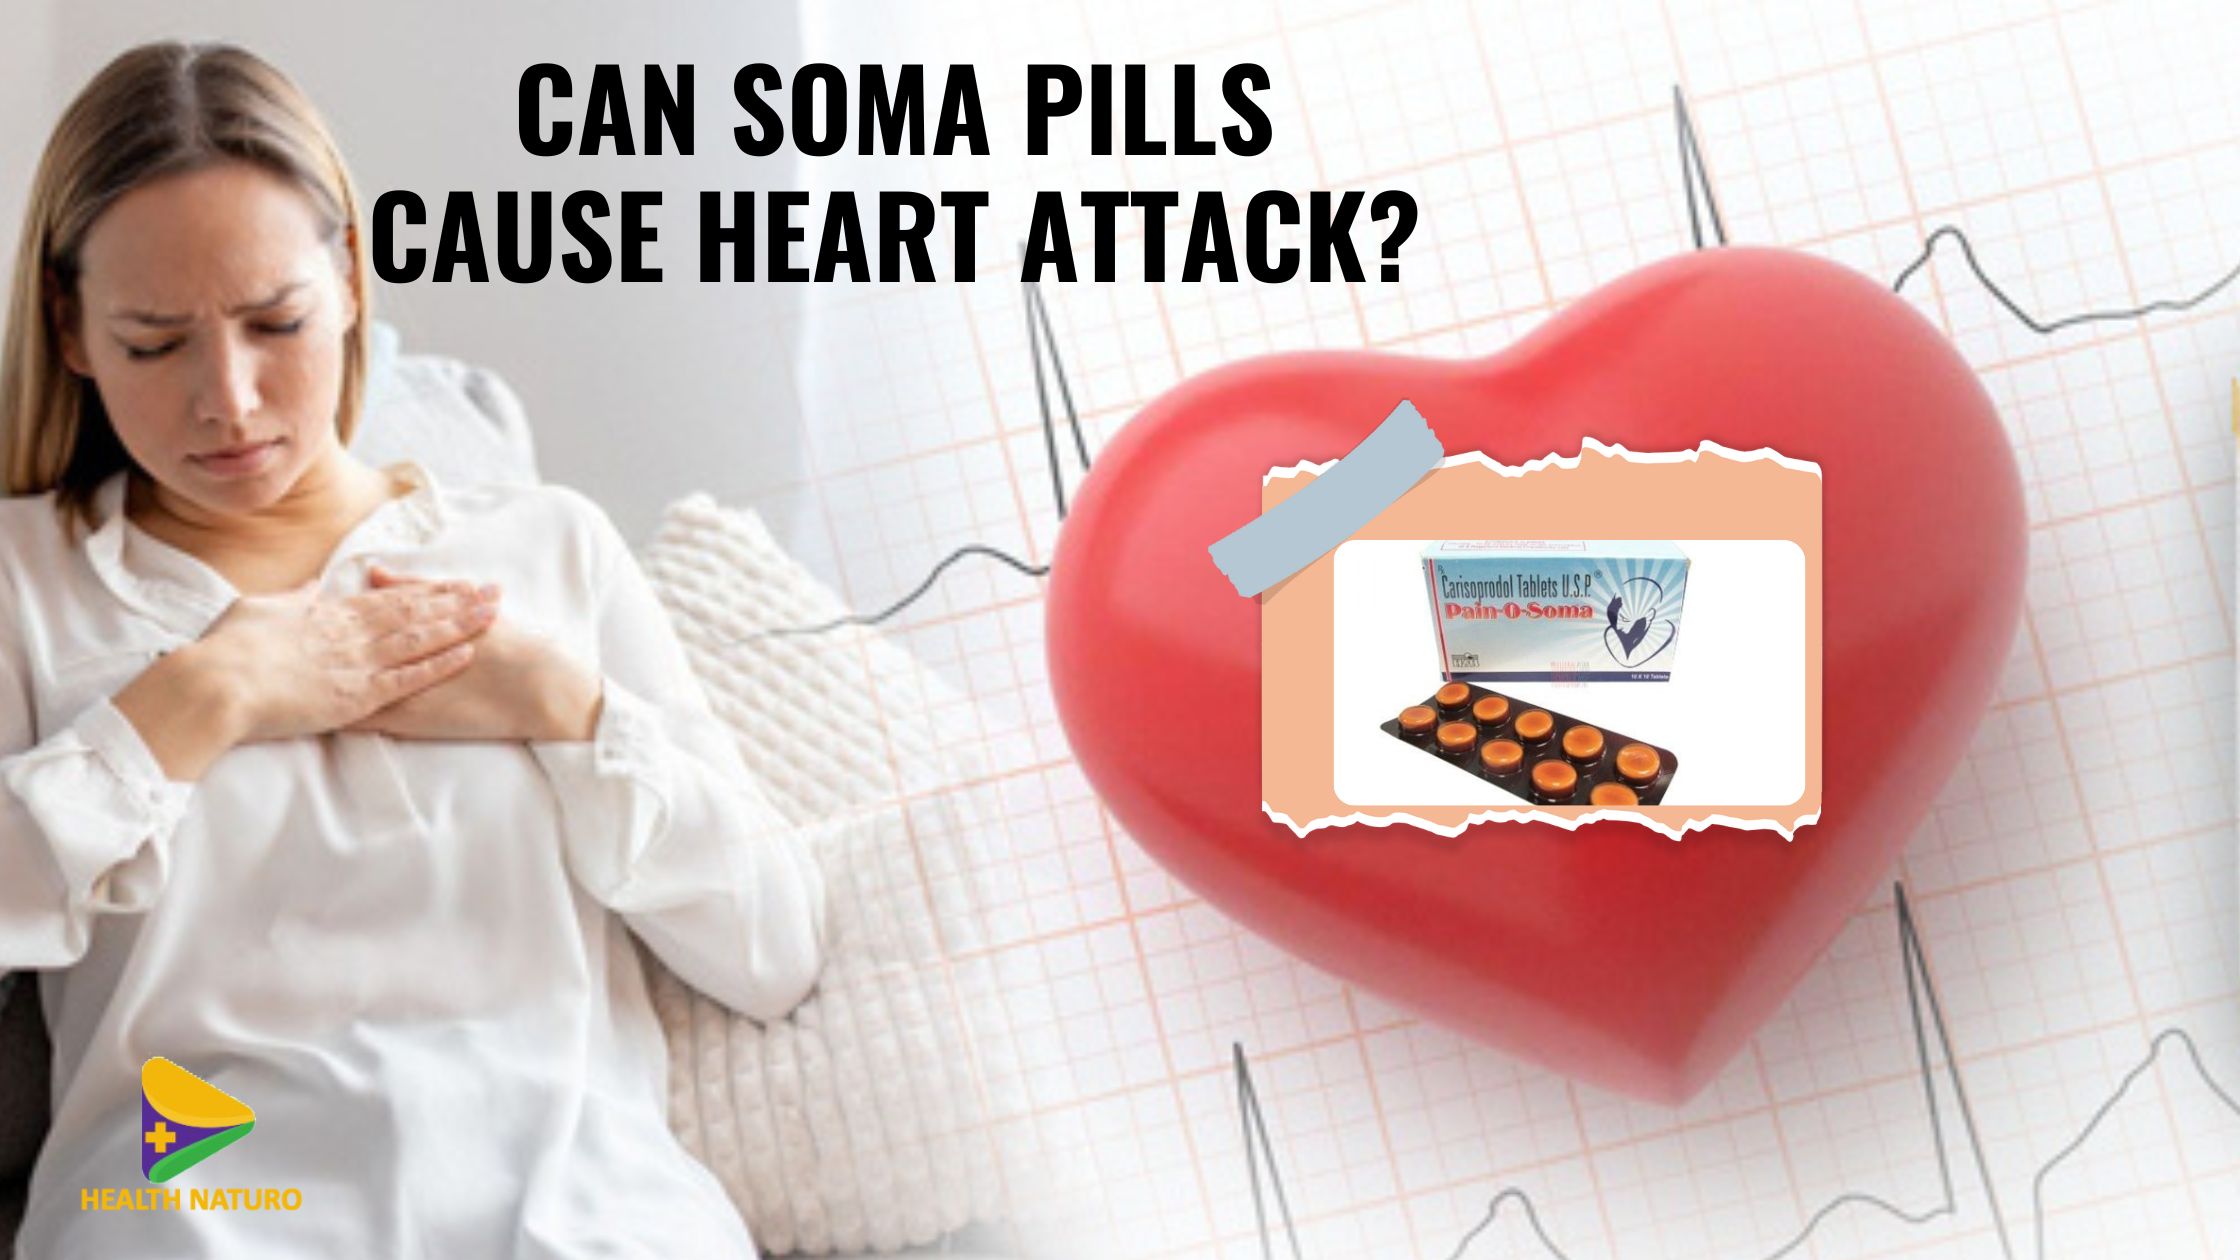 Can soma pills cause heart attack?